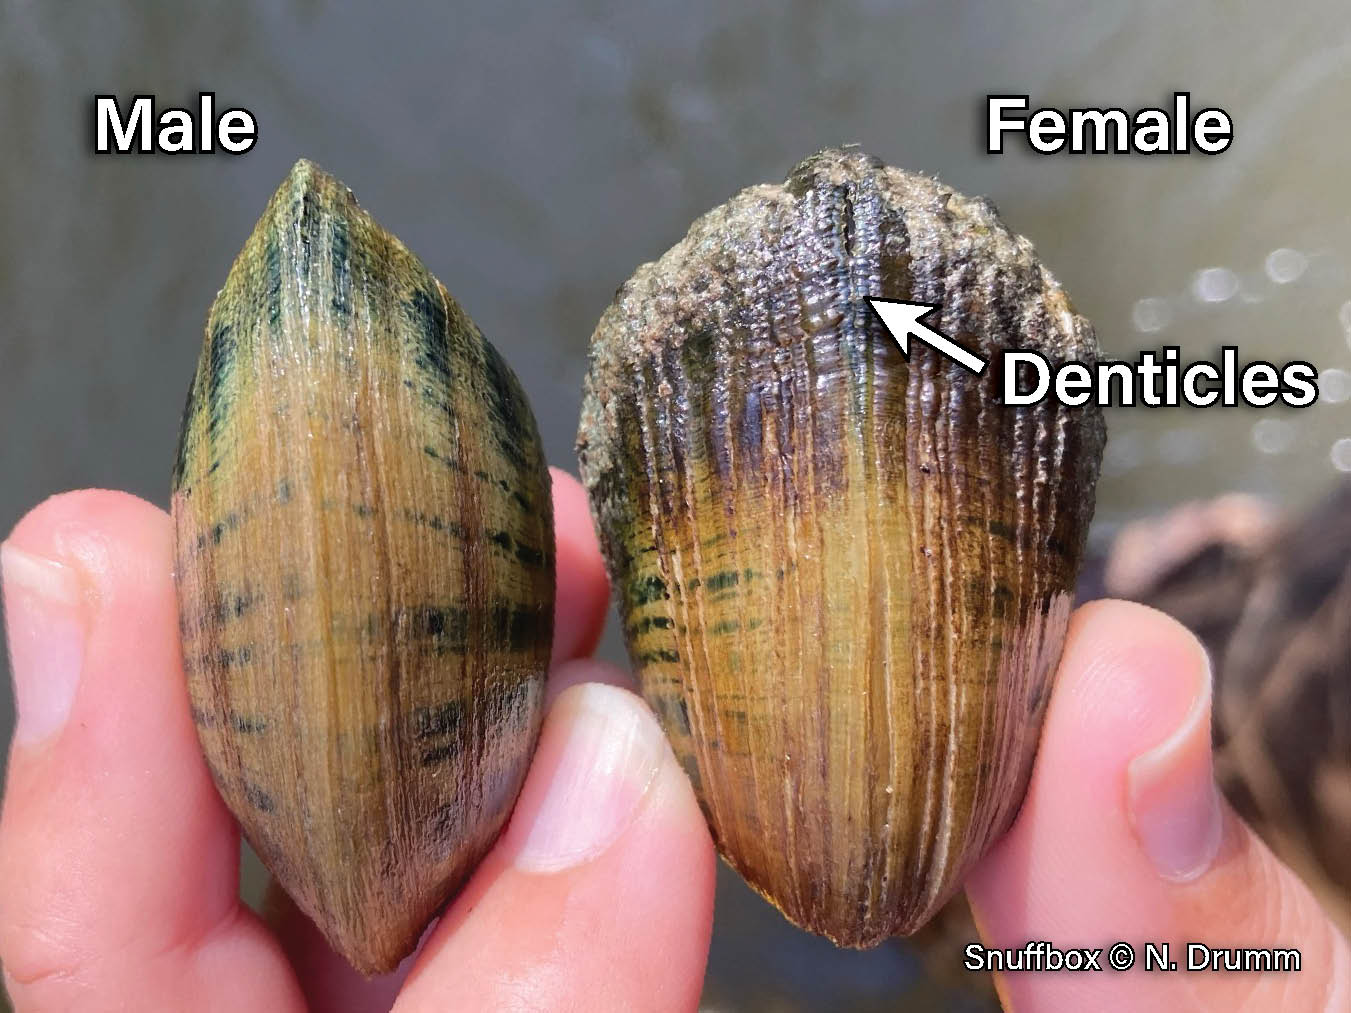 Picture of a male (left) and female (right) Snuffbox mussel, a small, triangular mussel with an inflated shell that has a posterior ridge and is yellowish-brown with green rays that look like dripping paint. The female is more inflated than the male and has denticles along the ventral margin.